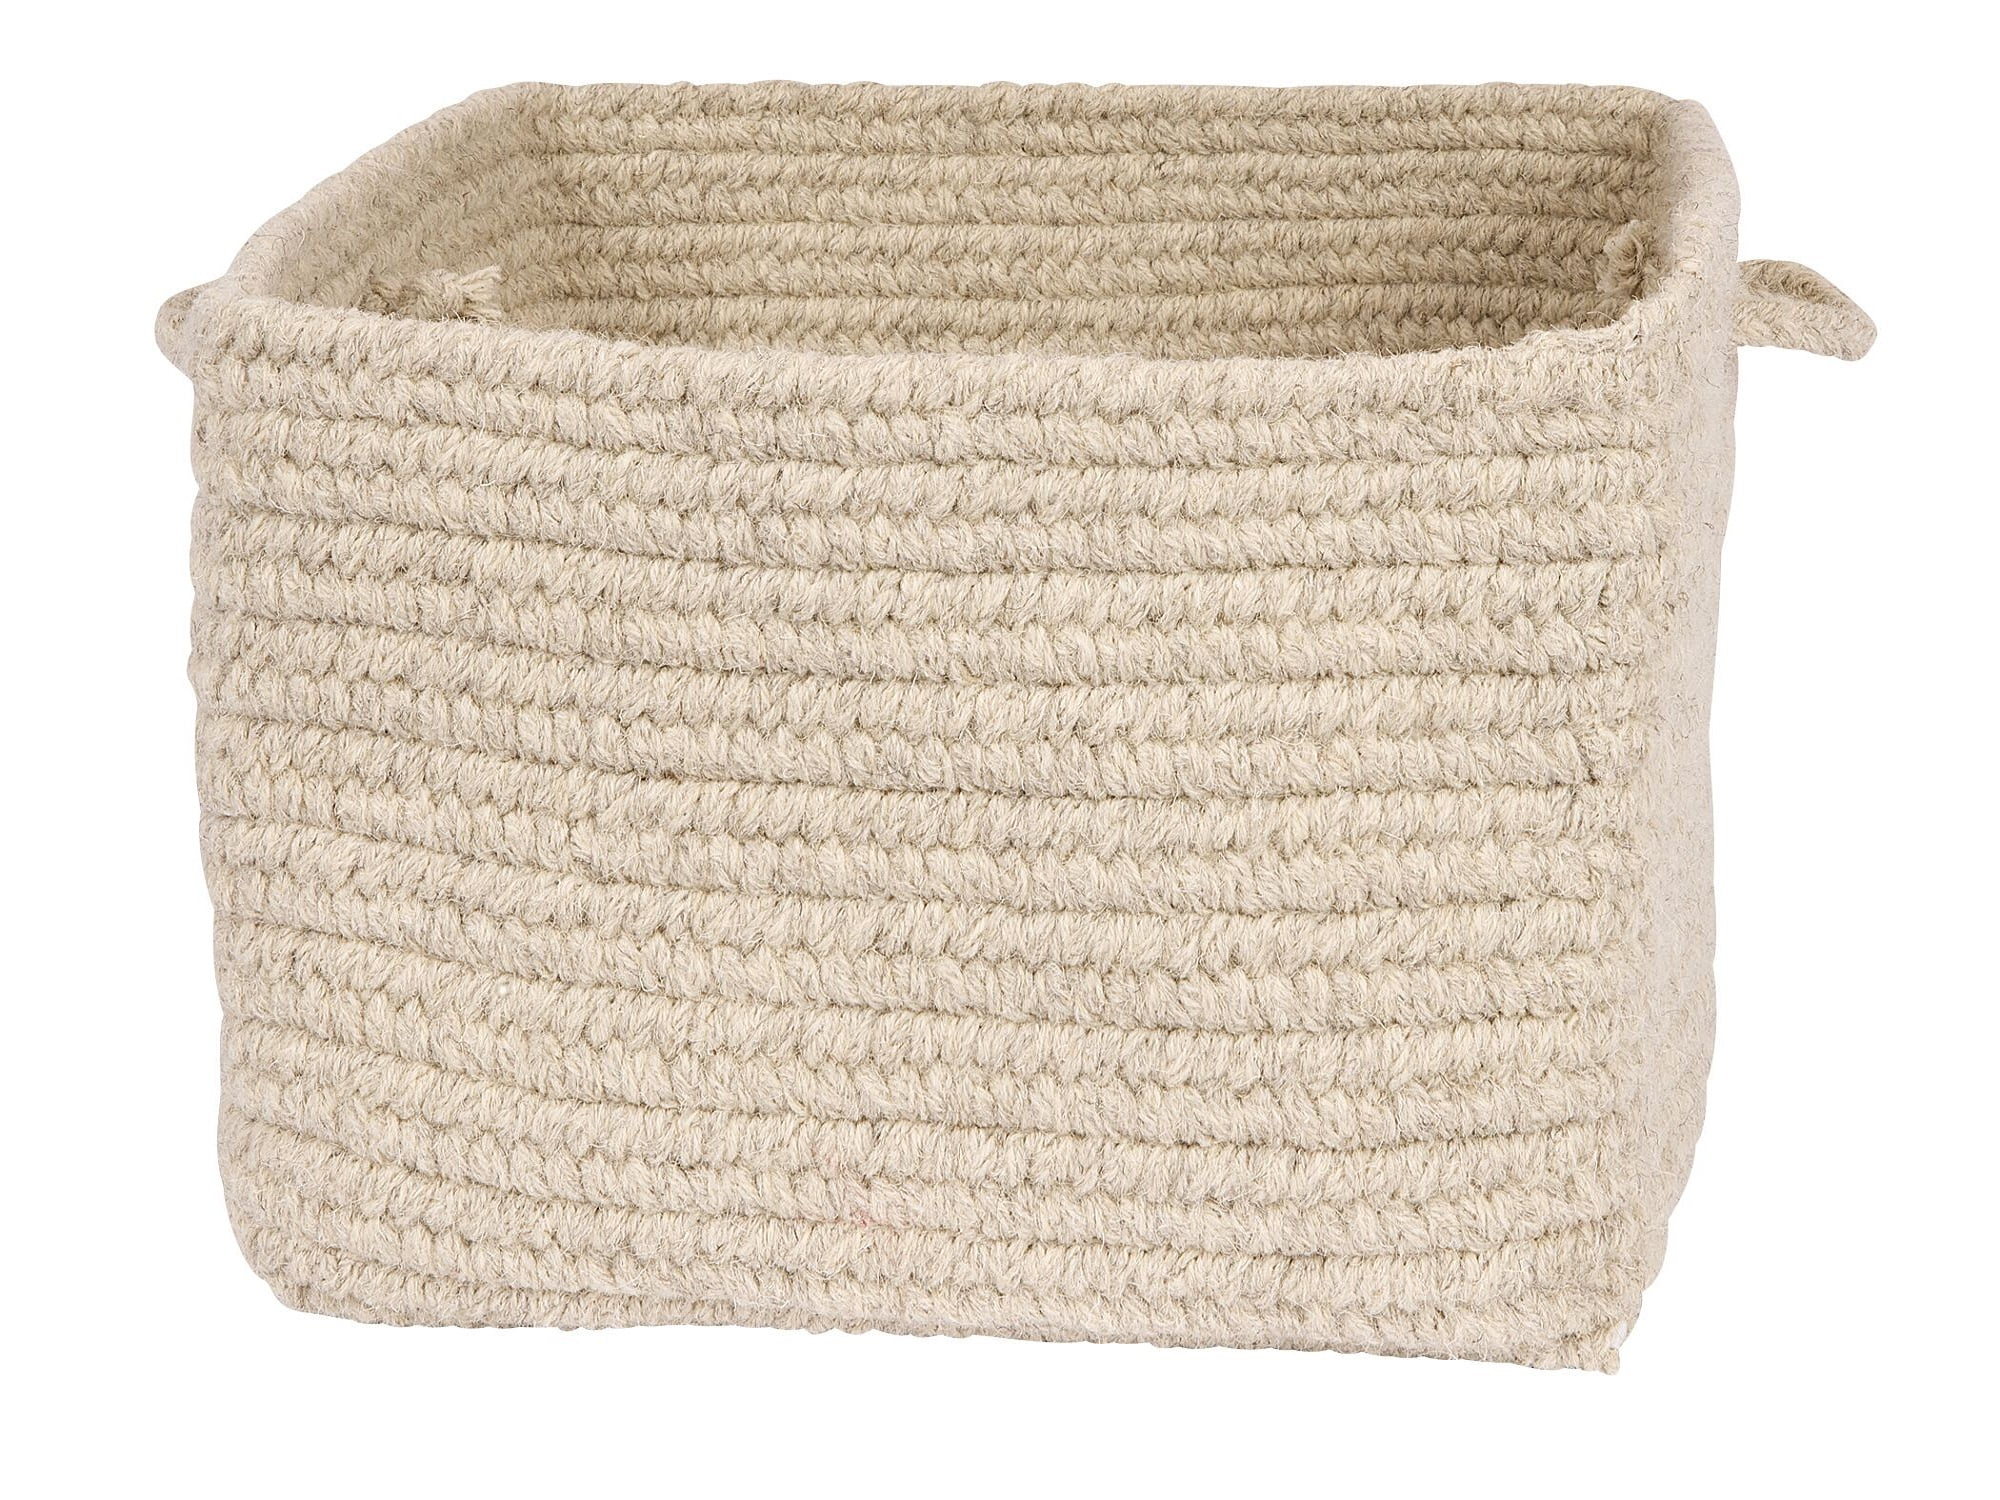 18 X 18 X 12 In. Chunky Natural Wool Light Gray Storage Basket